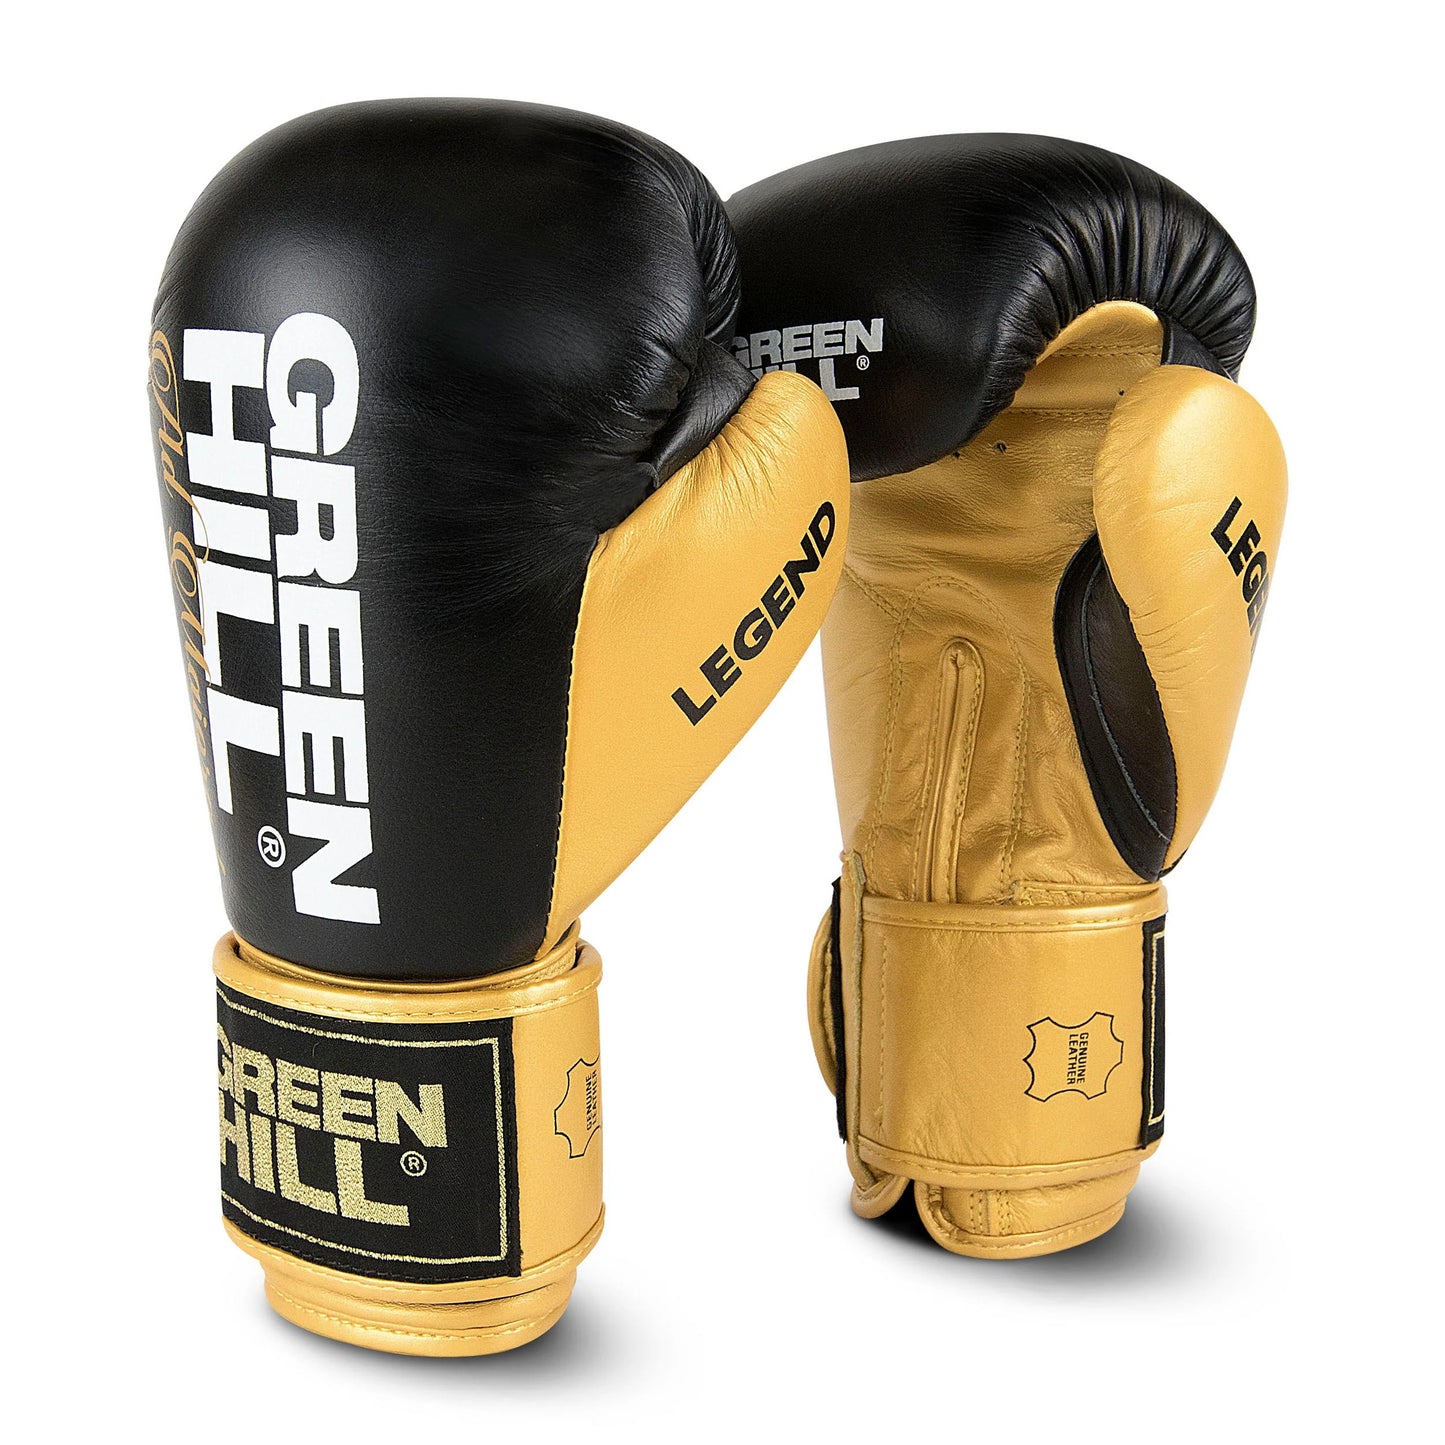 Boxing Gloves “LEGEND”  GOLD EDITION